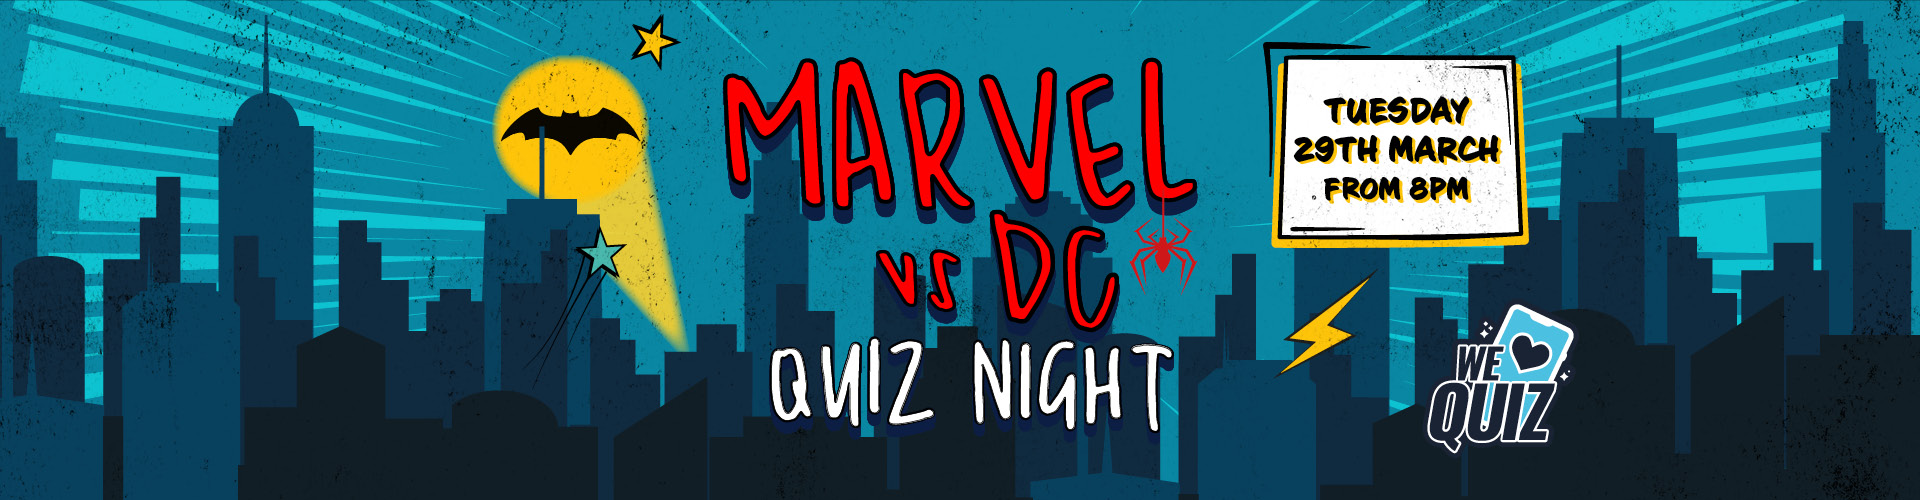 Marvel vs DC Quiz Night - Tuesday 29th March from 8pm